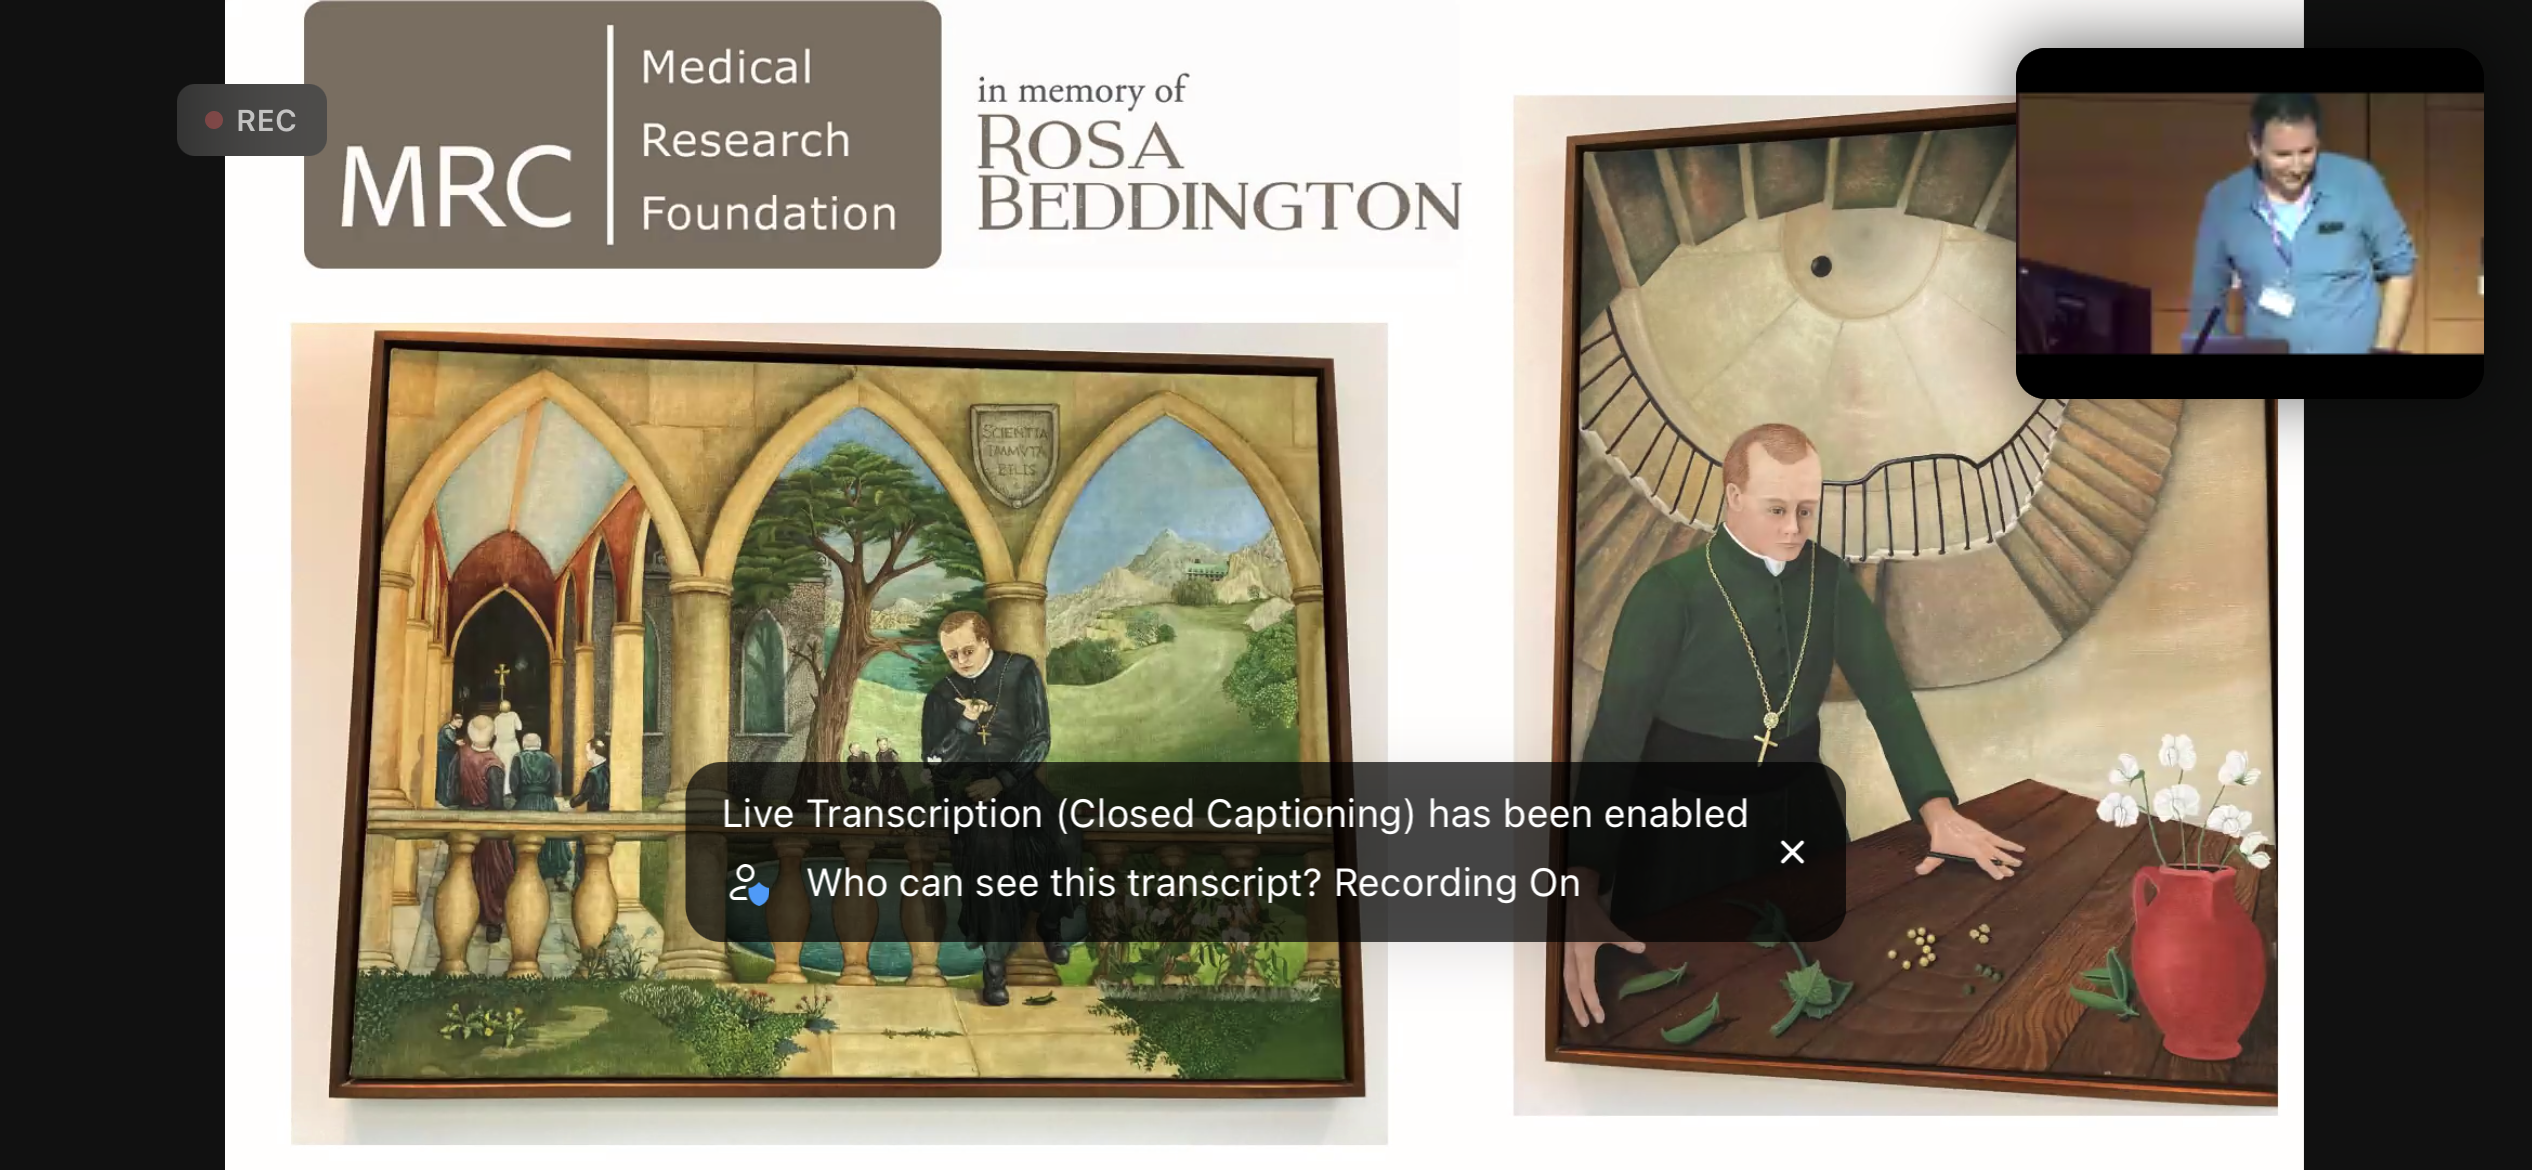 A screenshot from zoom showing concluding remarks from Nic Tapon (organiser) sharing some of Rosa's paintings of Mendel.